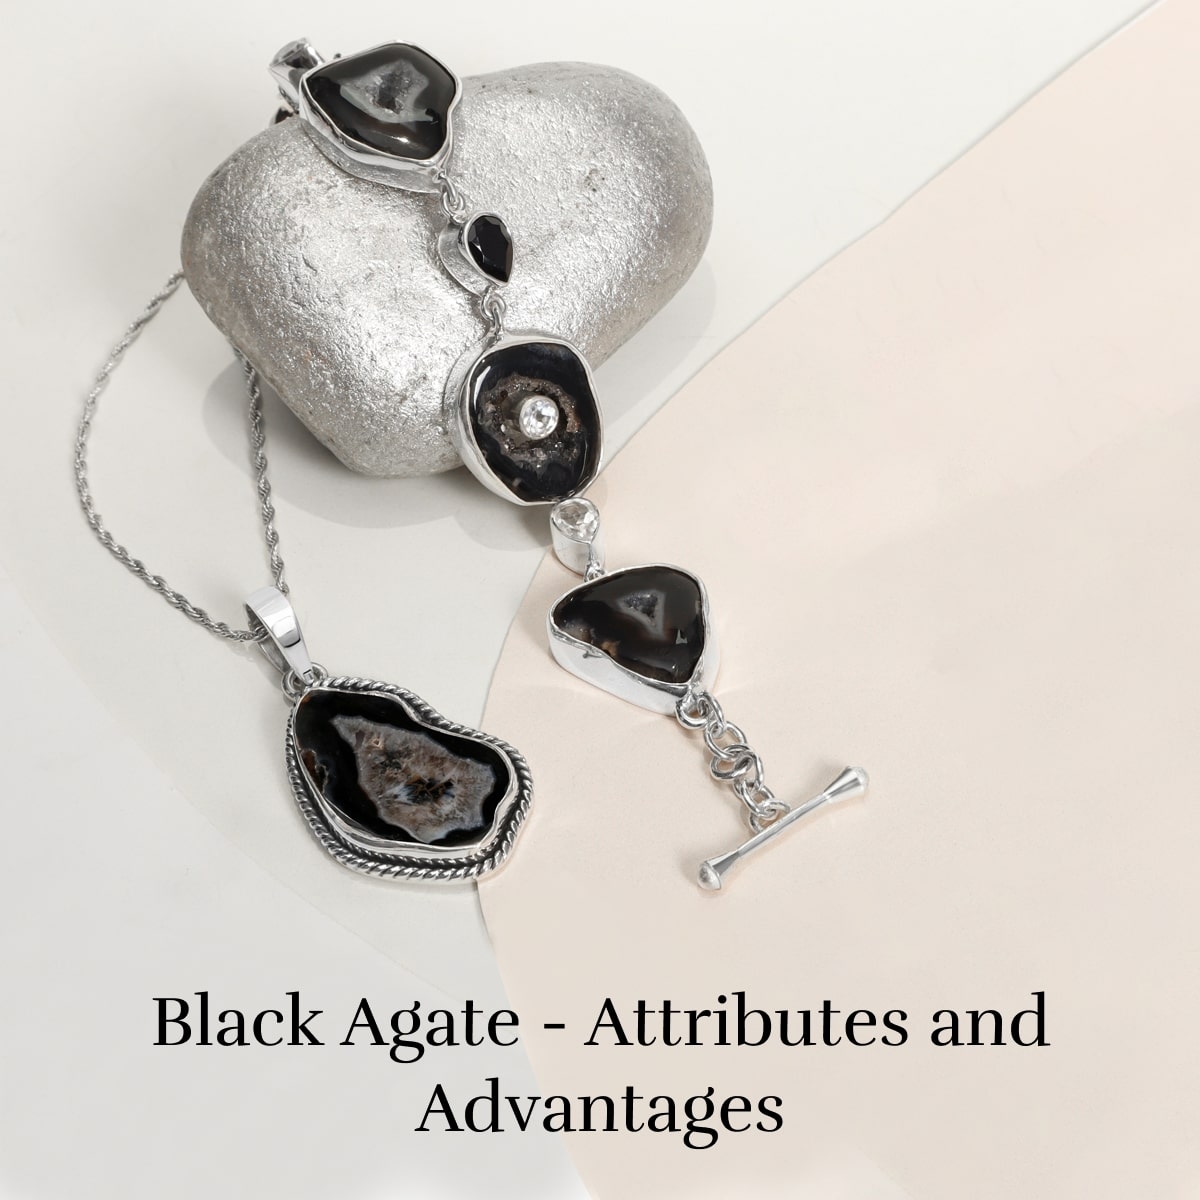 Black Agate Properties and Benefits